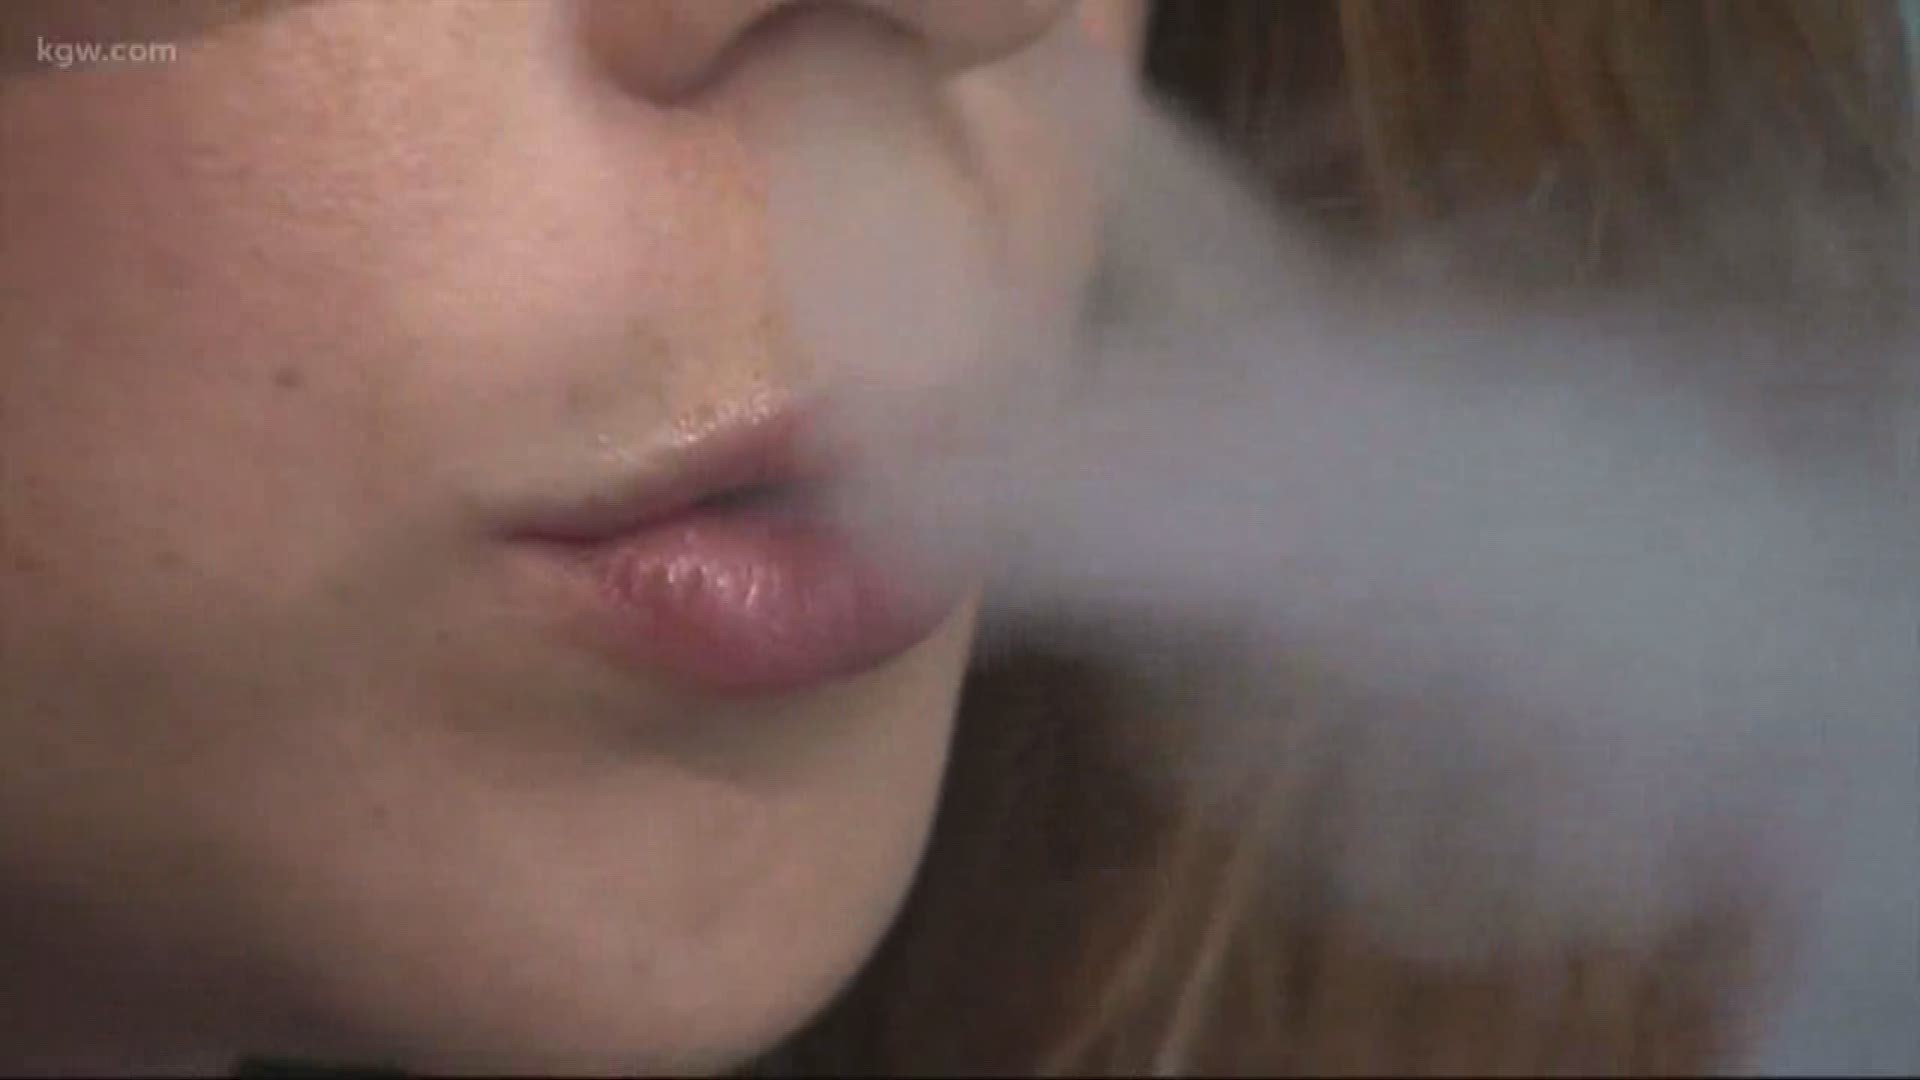 The latest on the vaping-related illnesses. The OHA has given the governor options, including a ban.